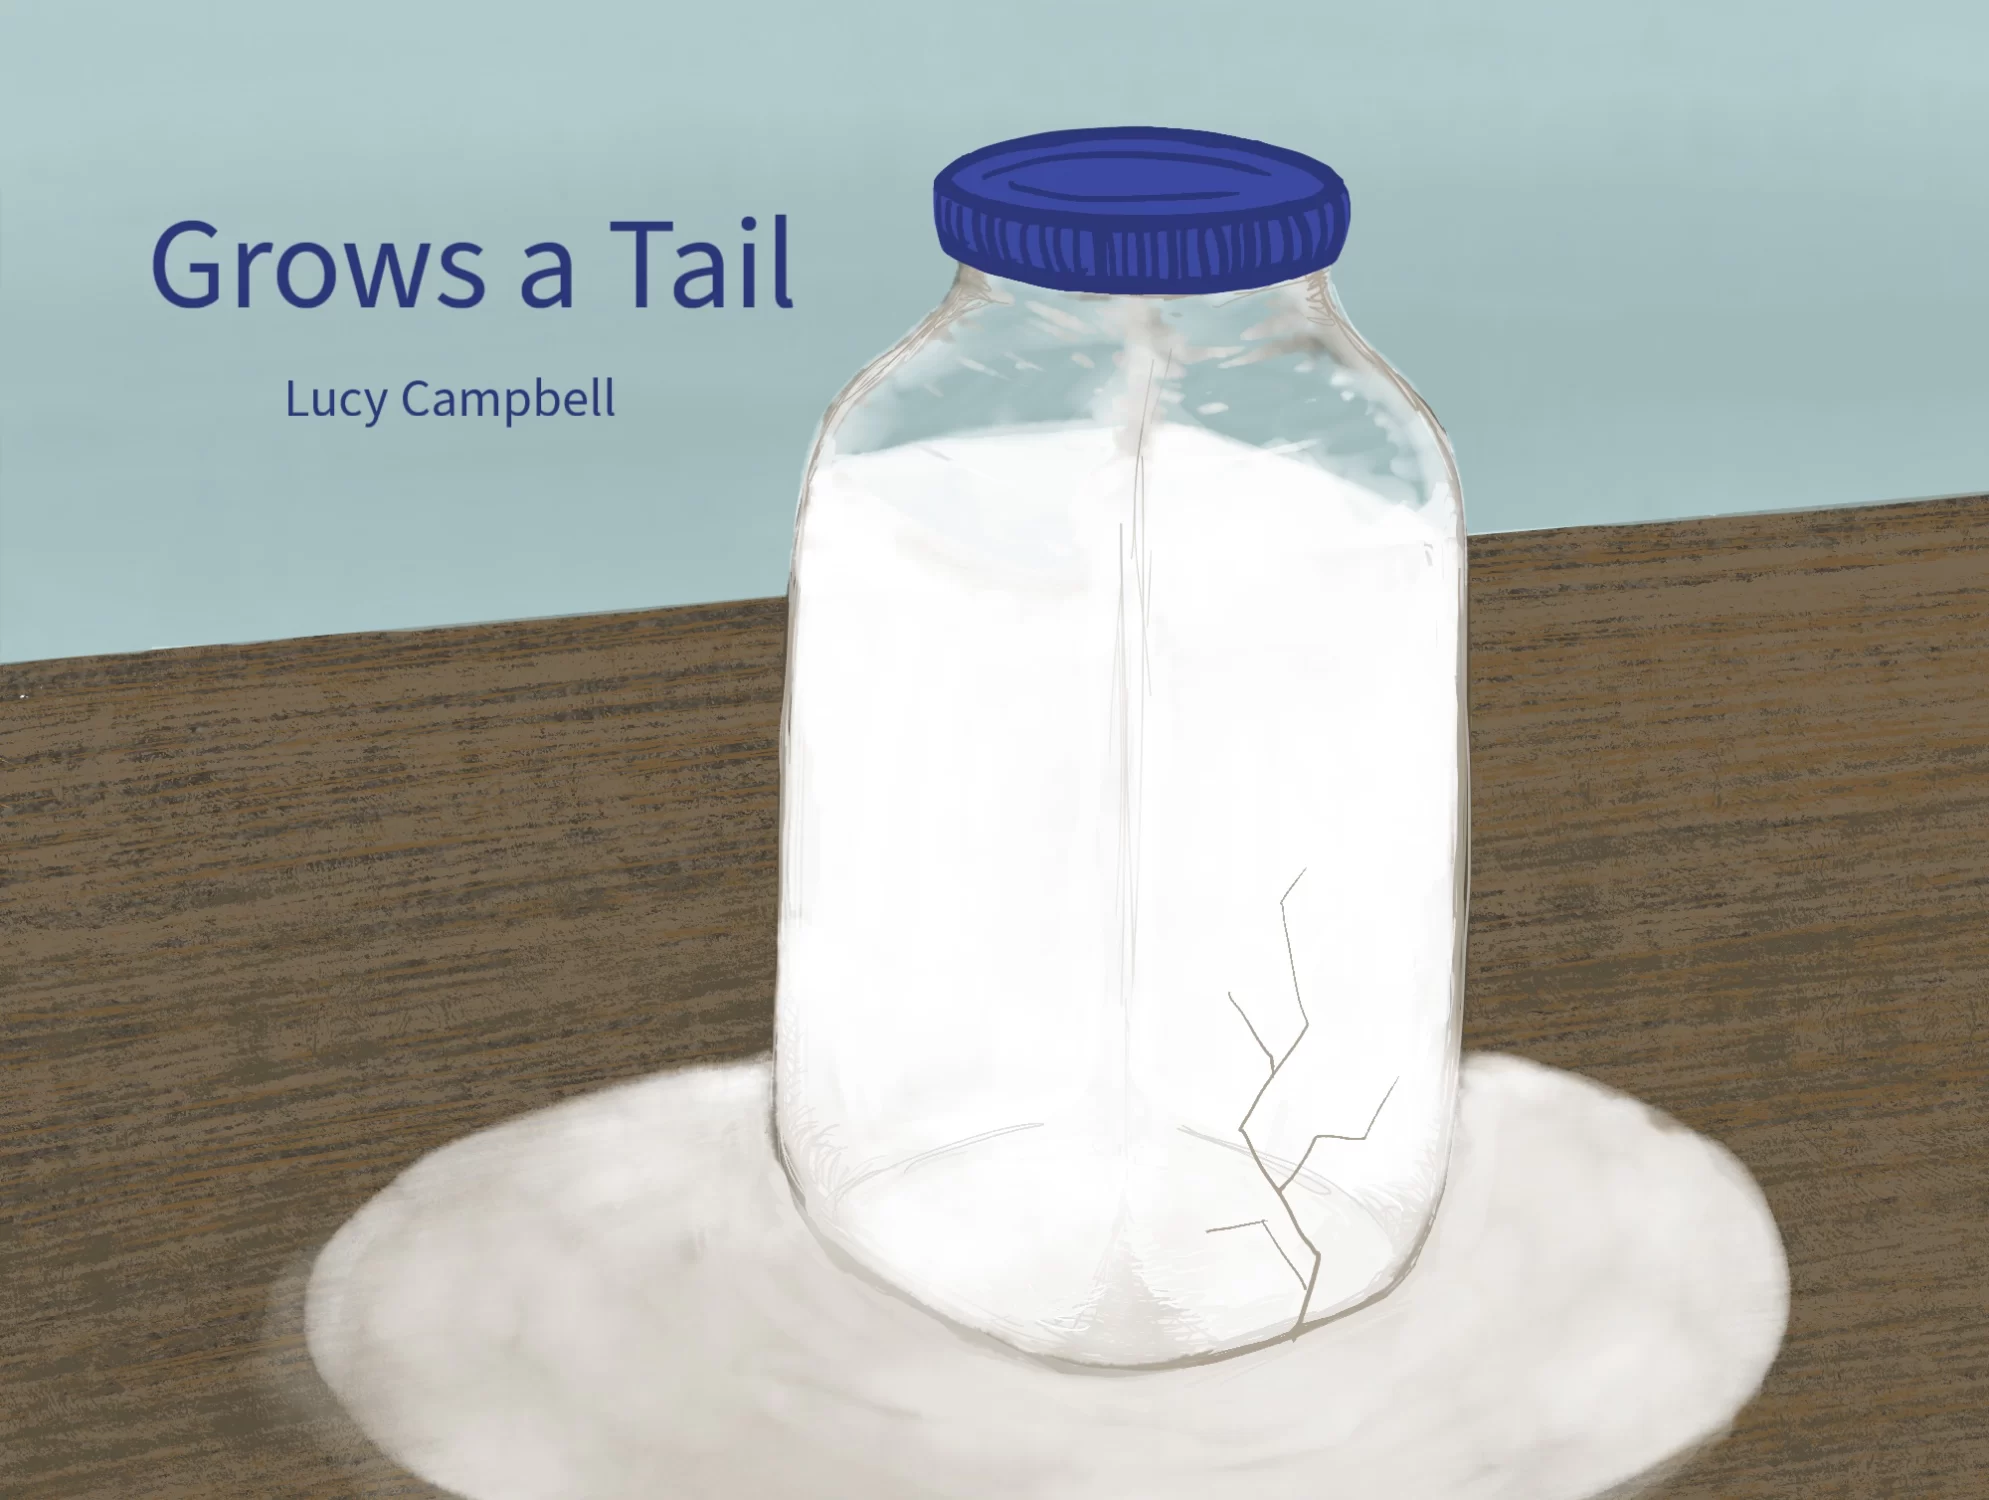 Grows a Tail by Lucy Campbell